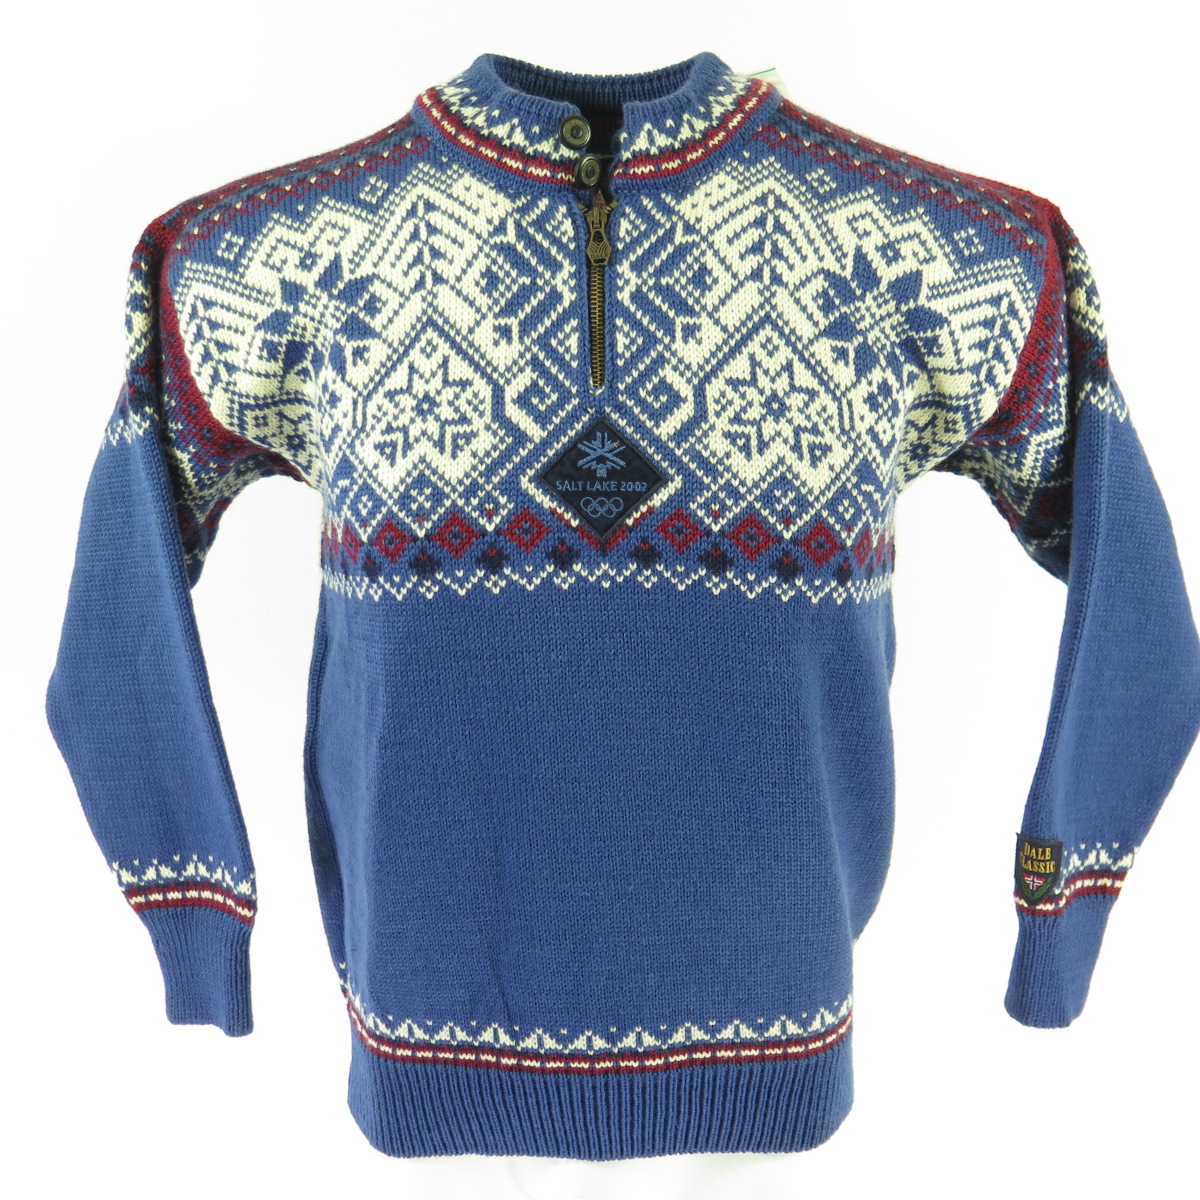 Dale of Norway 2002 Olympic Sweater XSmall NEW Salt Lake Olympics Wool ...